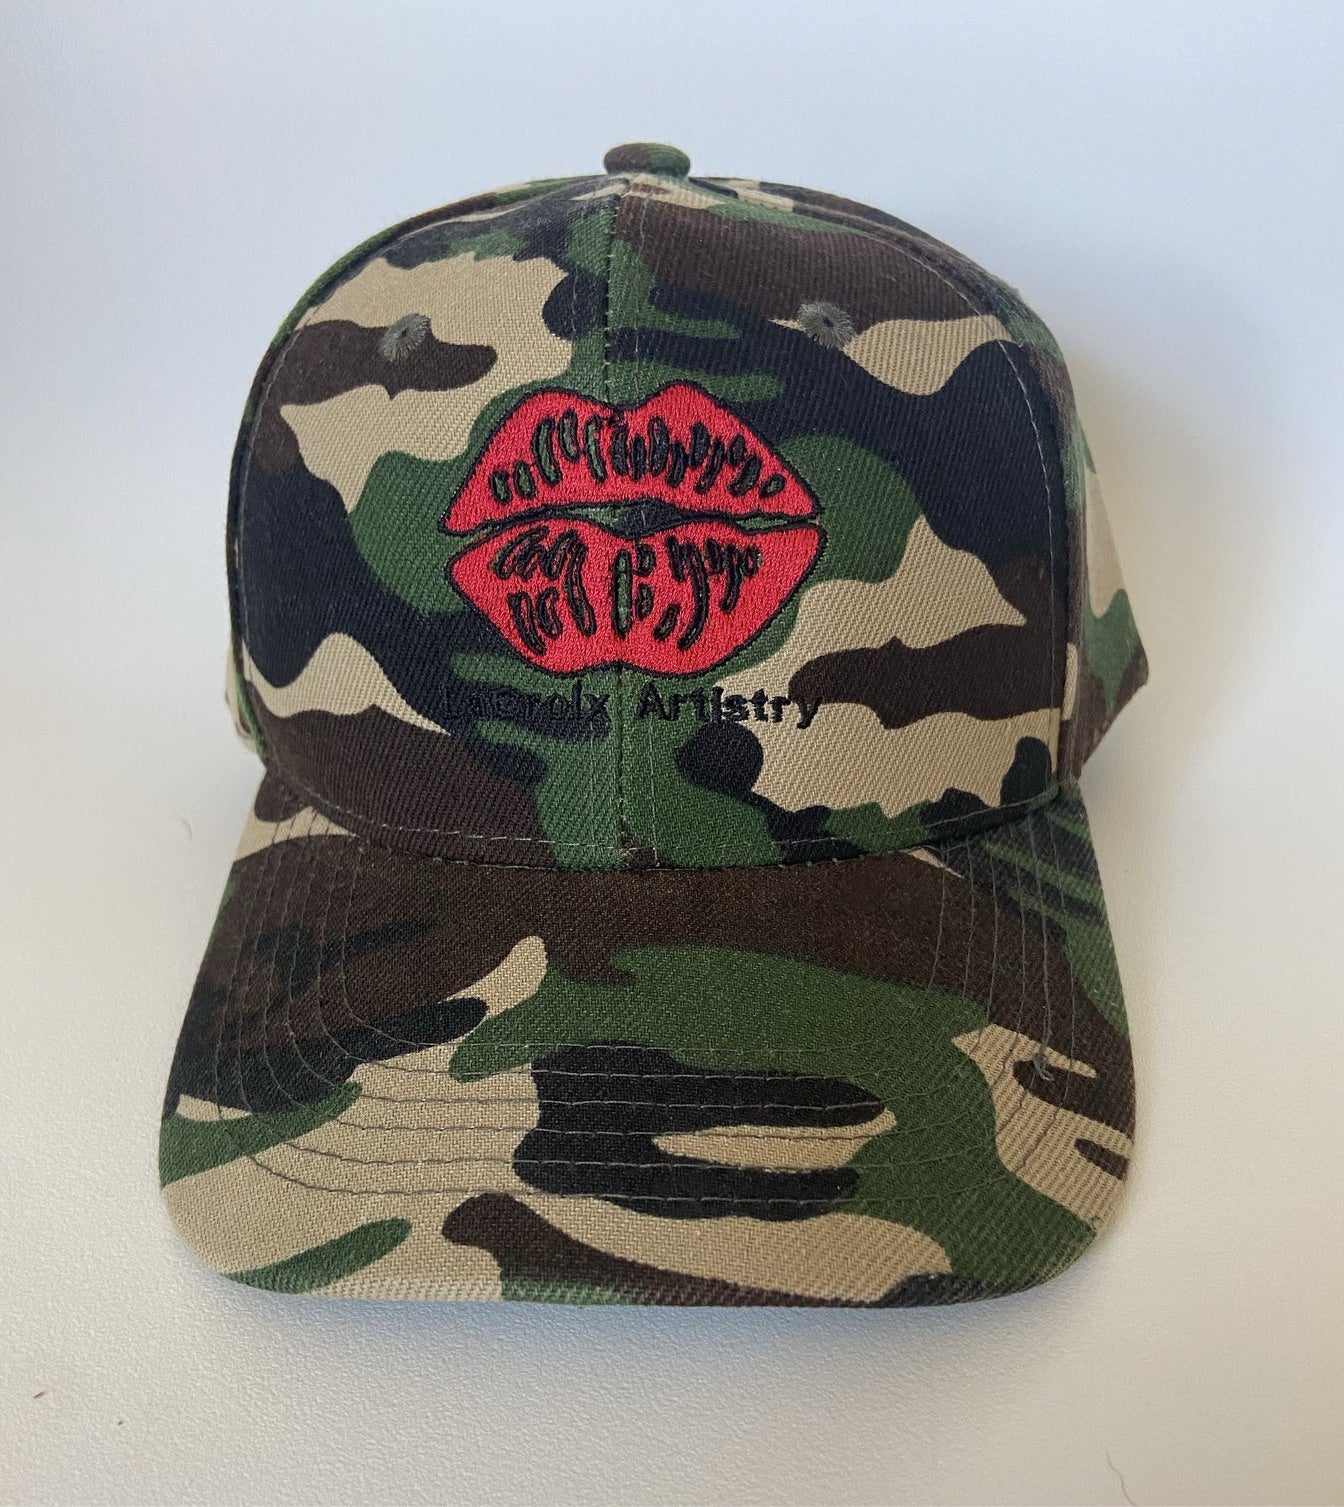 Red Kissy Lips camouflage hat